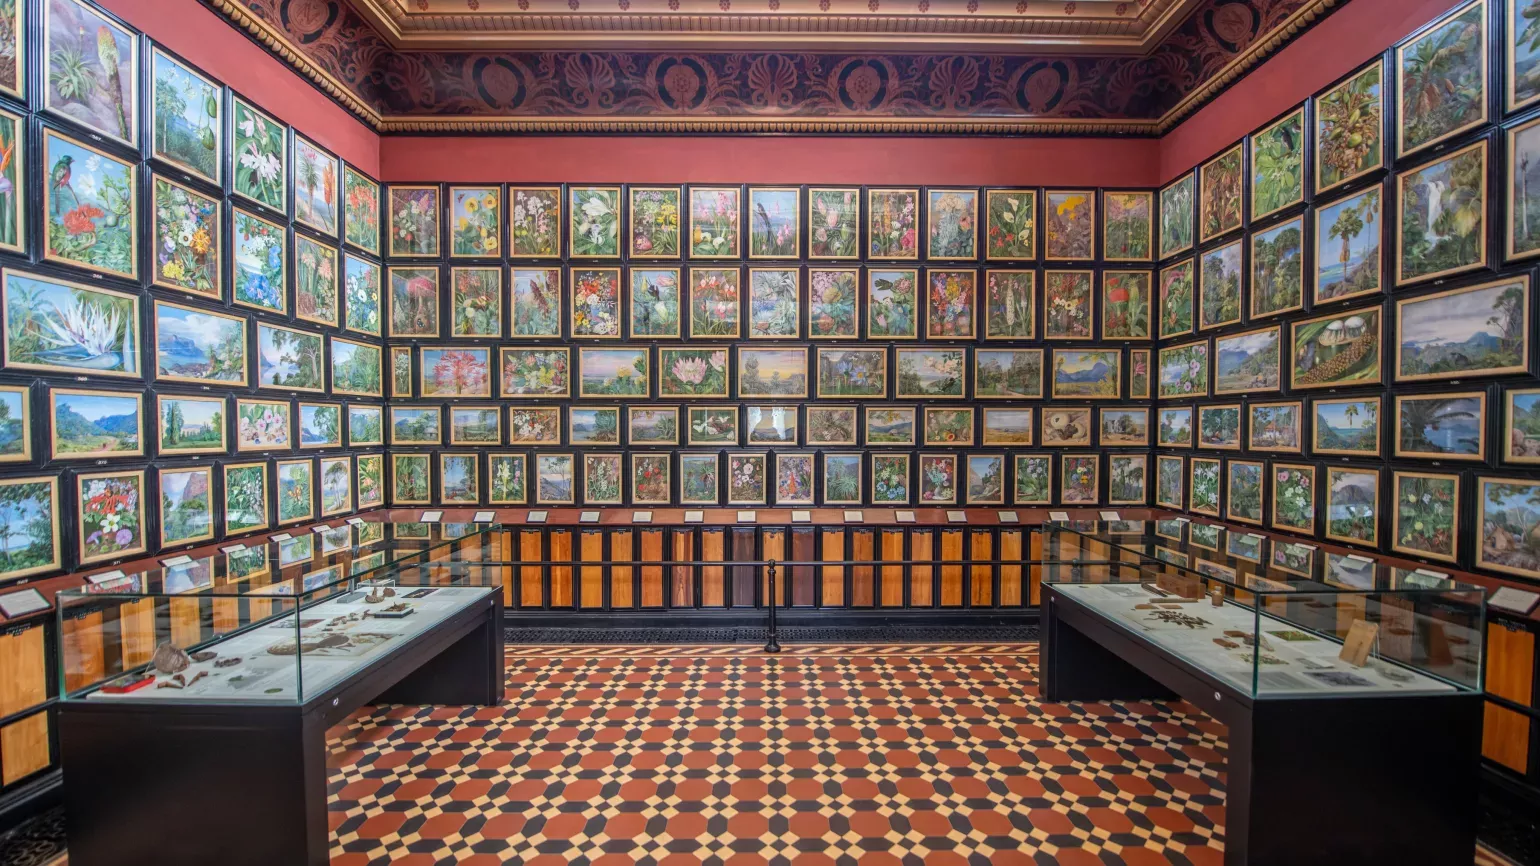 Art gallery space where the walls are lined with colourful botanical paintings, with glass display cases standing against the left and right walls